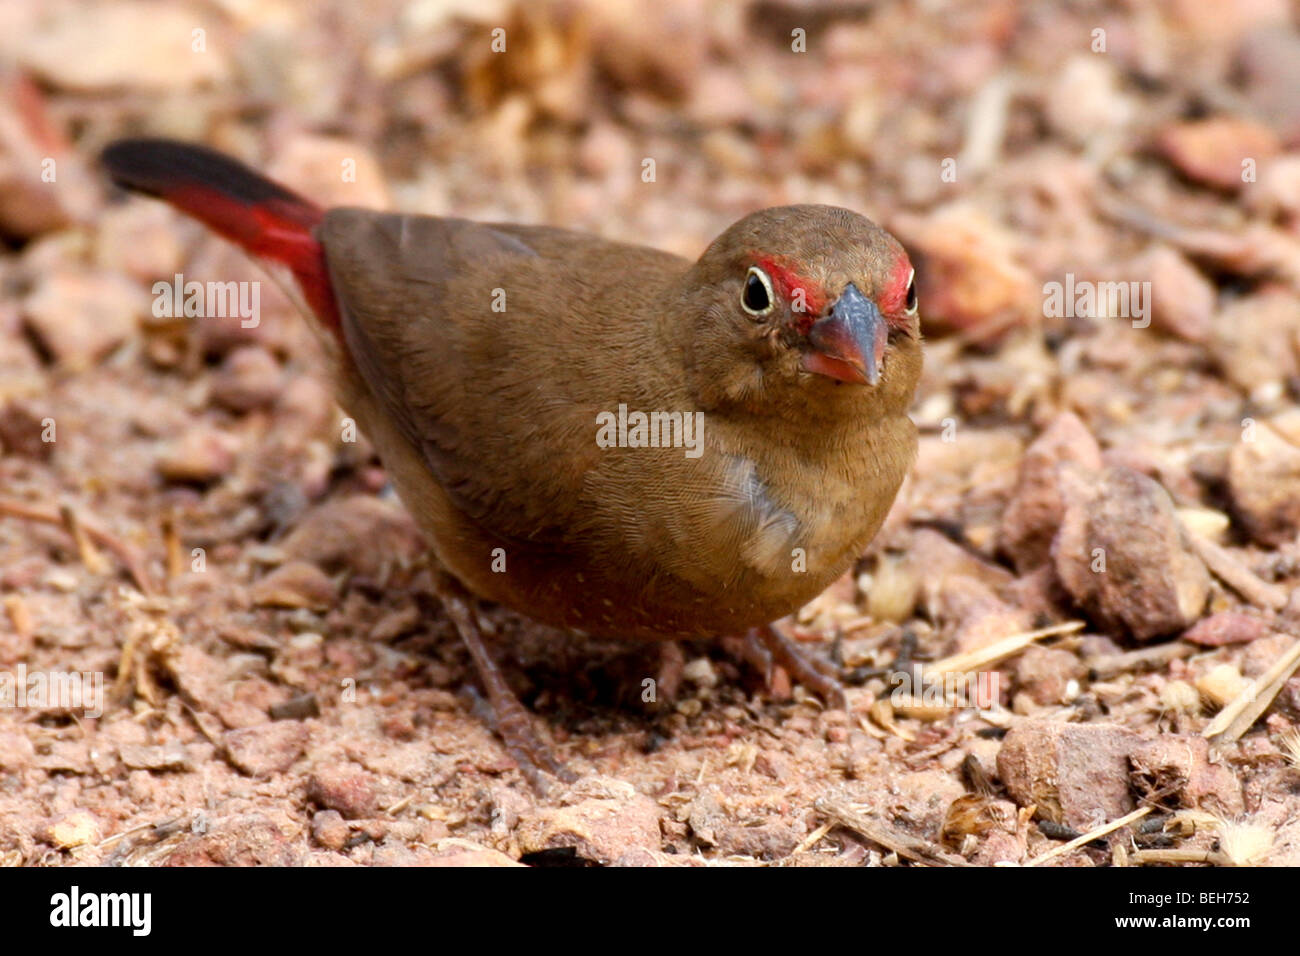 Female Red-billed firefinch or Senegal firefinch, Lagonosticta senegala, searching for seeds/ food, The Gambia Stock Photo